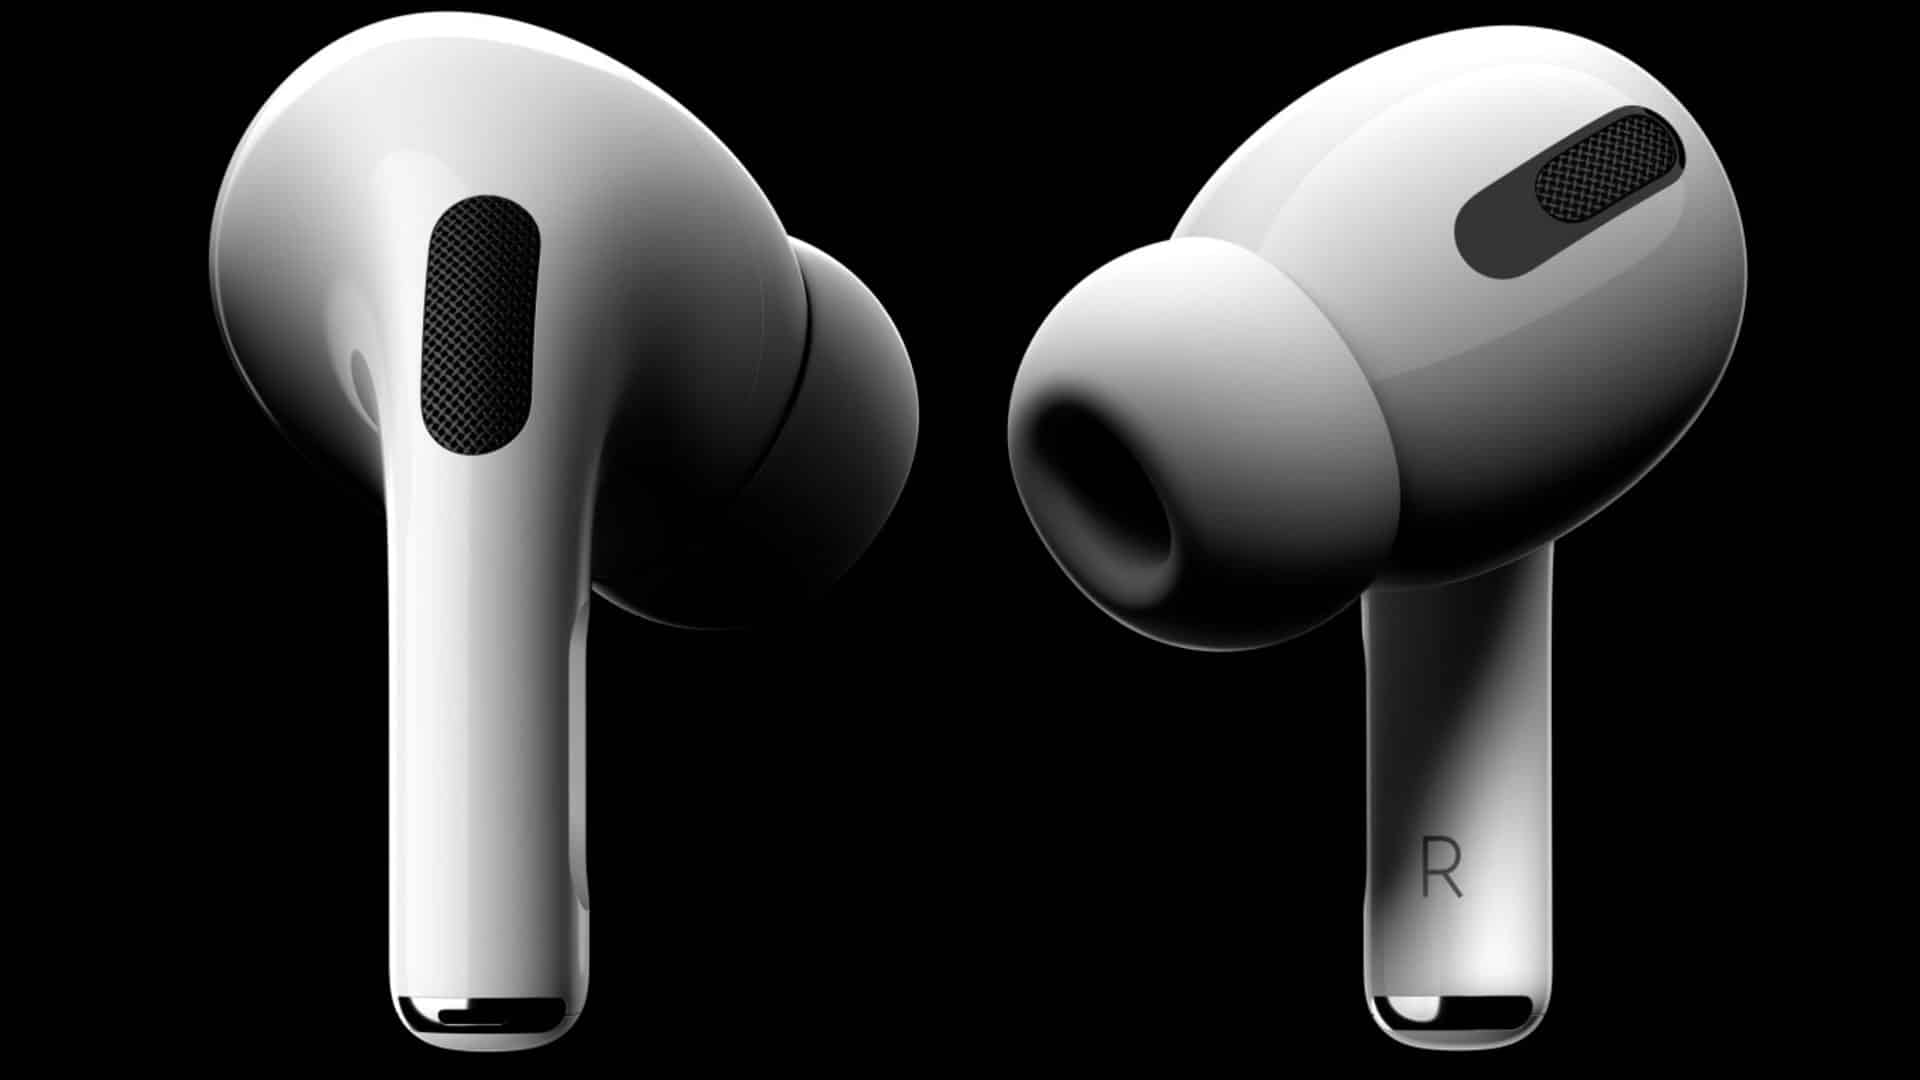 AirPod Pro launched